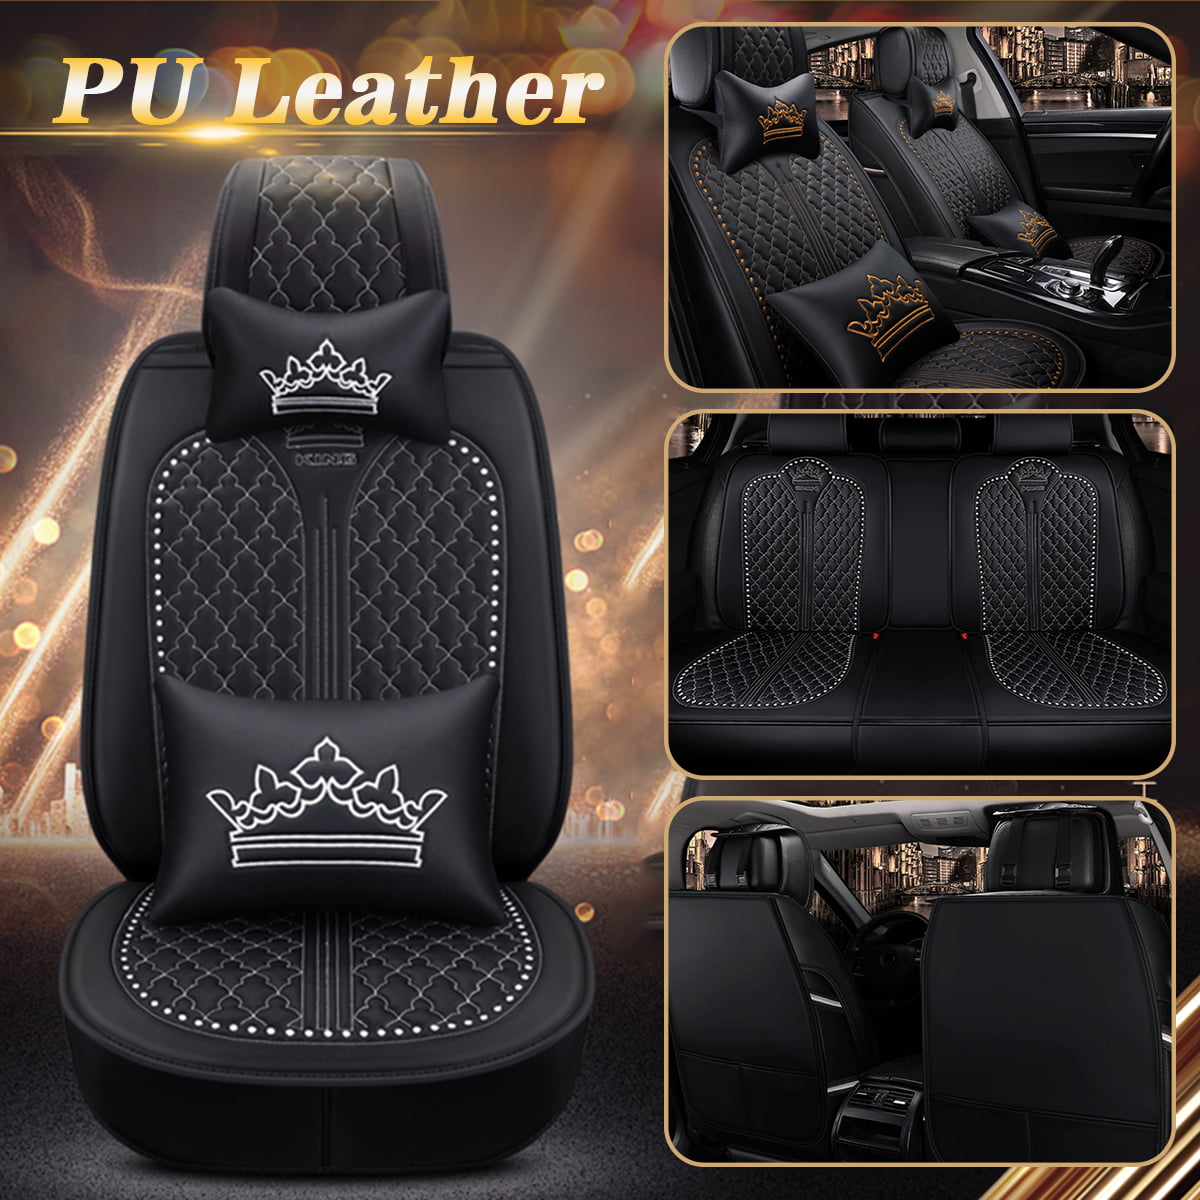 Leader Accessories Auto 2 Leather Black Seat Covers Universal Fit Cars SUV Trucks Front Seats Low Back with Airbag 